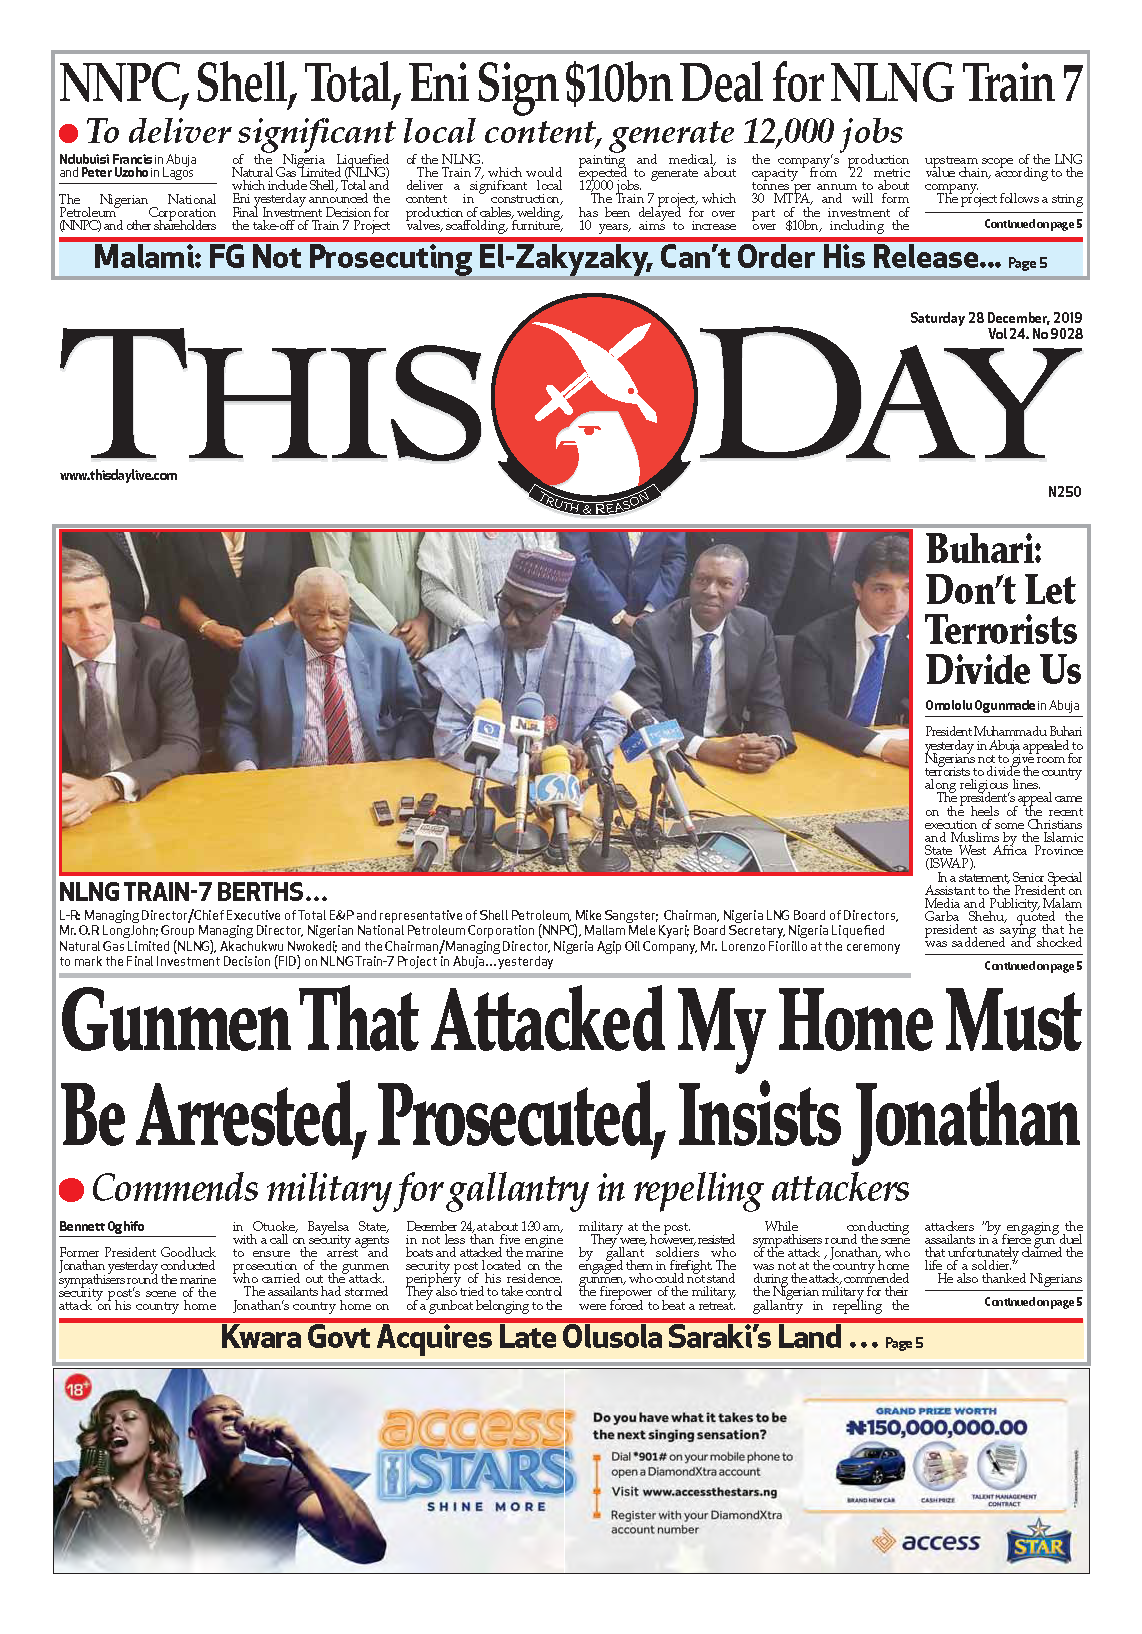 Saturday 28th December 19thisdaylive